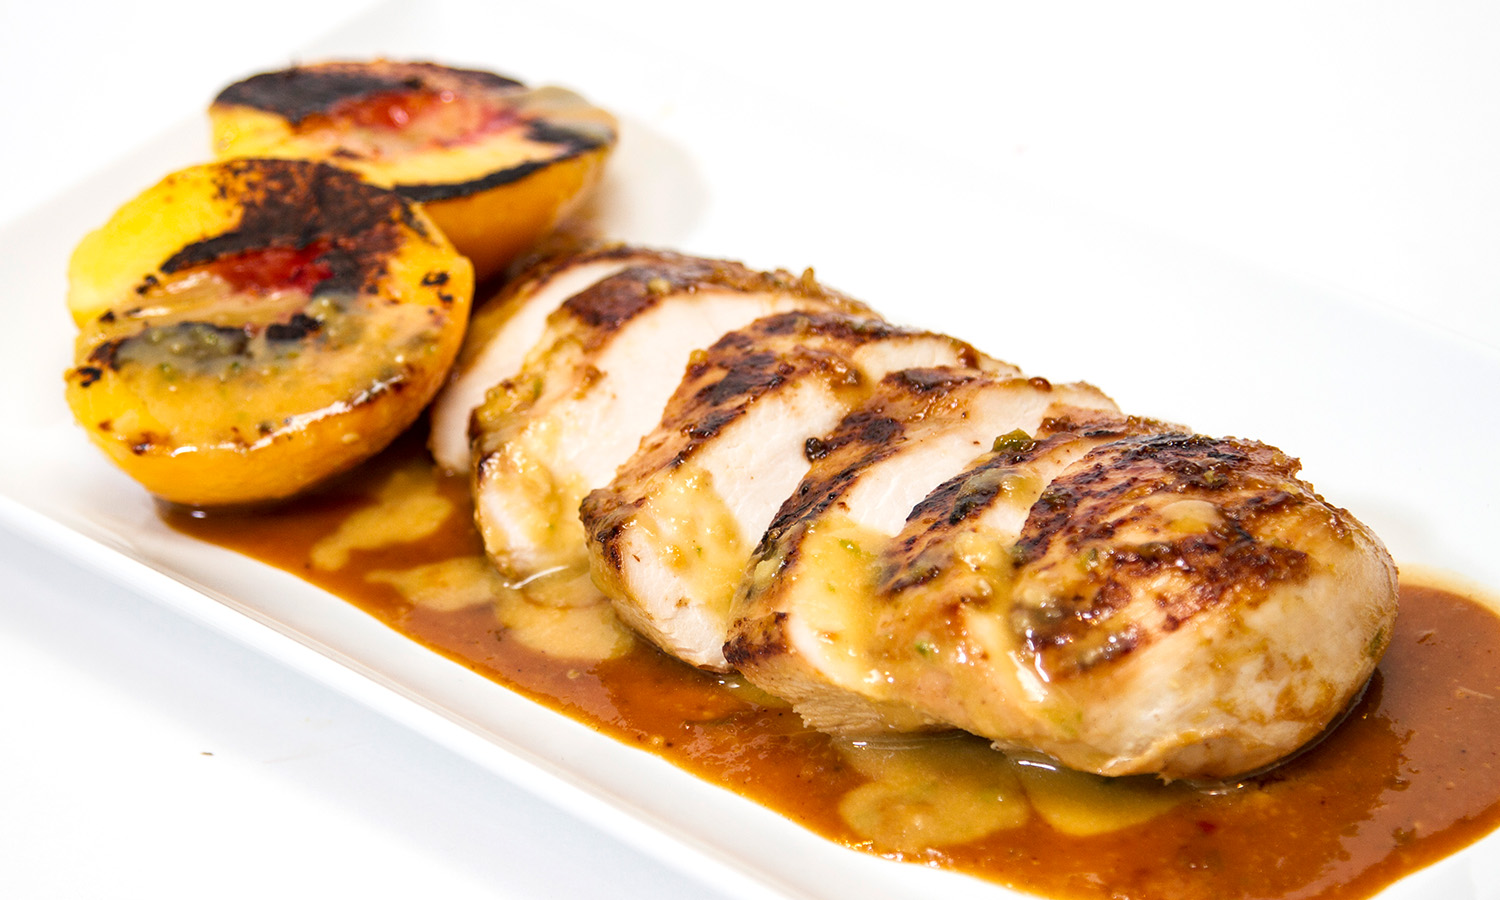 Pan-Seared Chicken Breasts With Spicy Peach Glaze